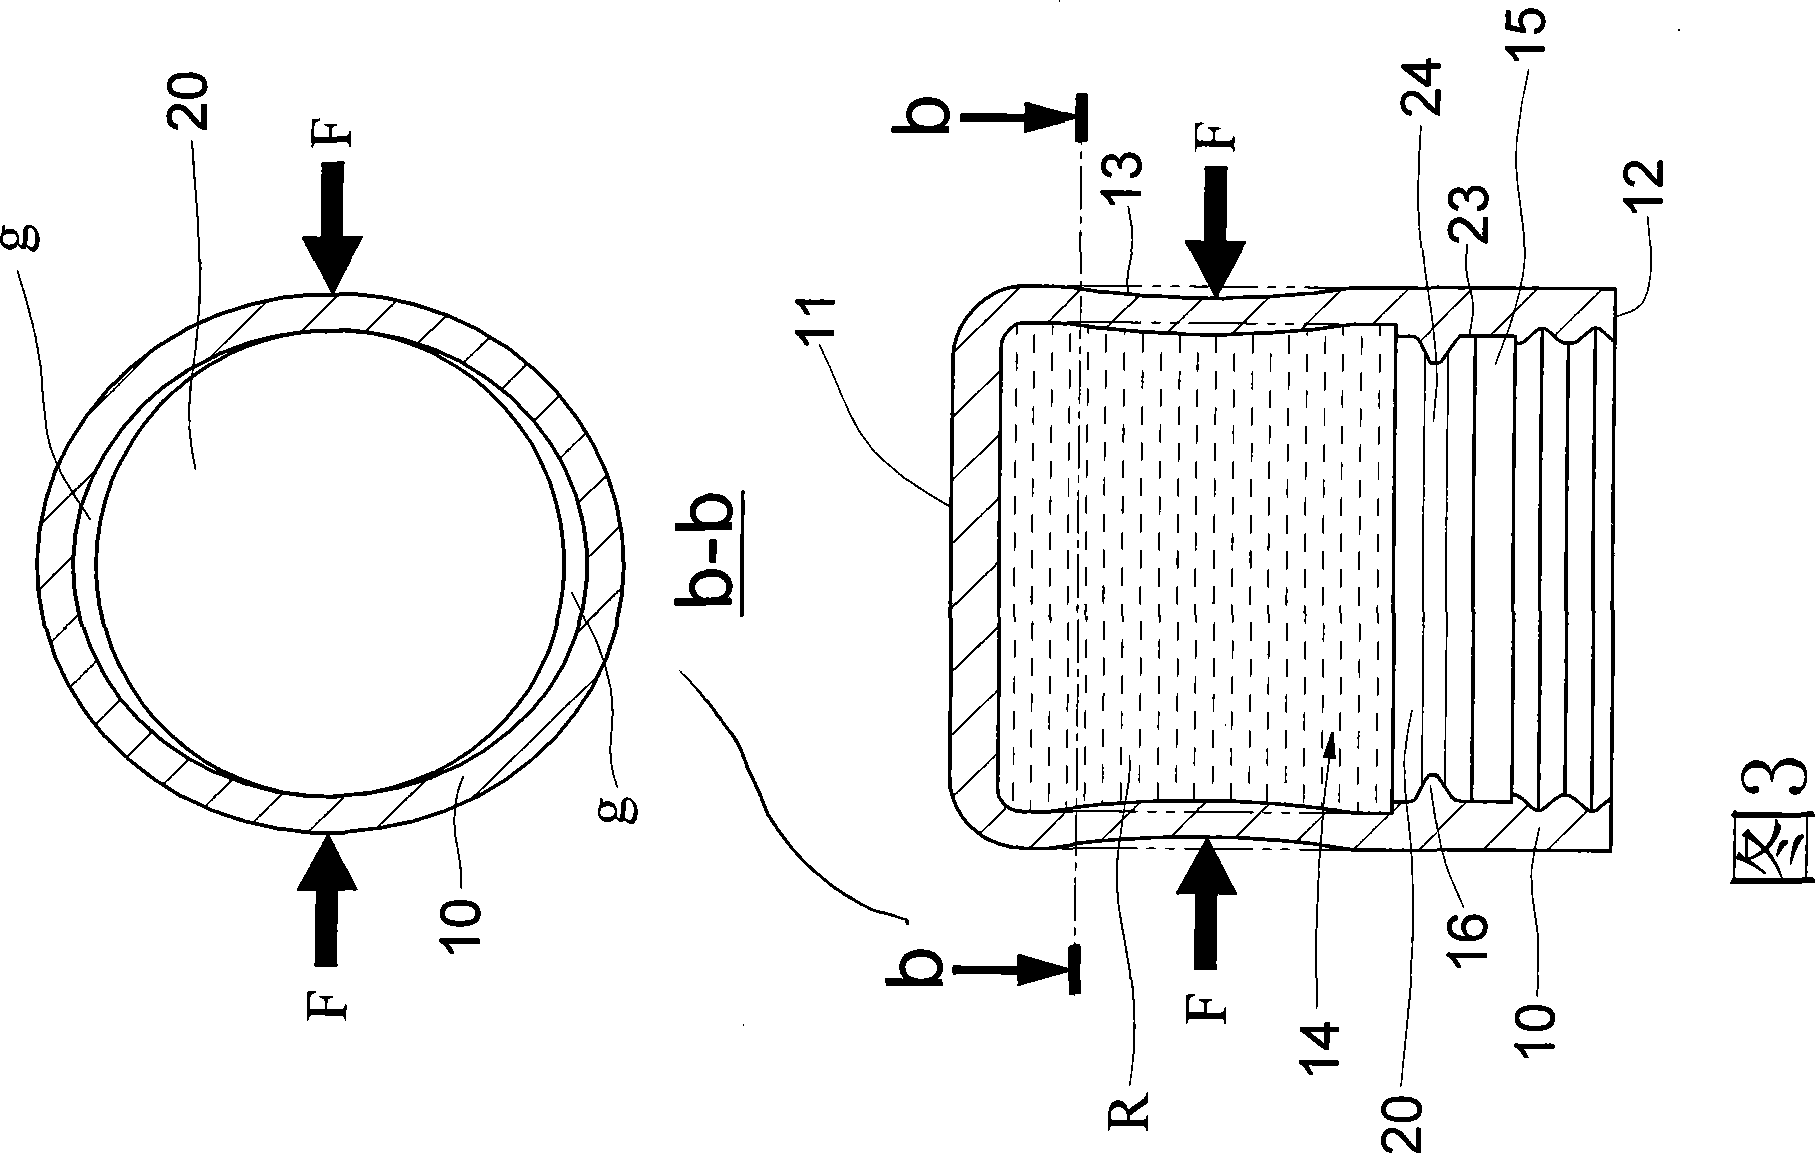 Structure capable of preventing liquid substance leakage in bottle cap